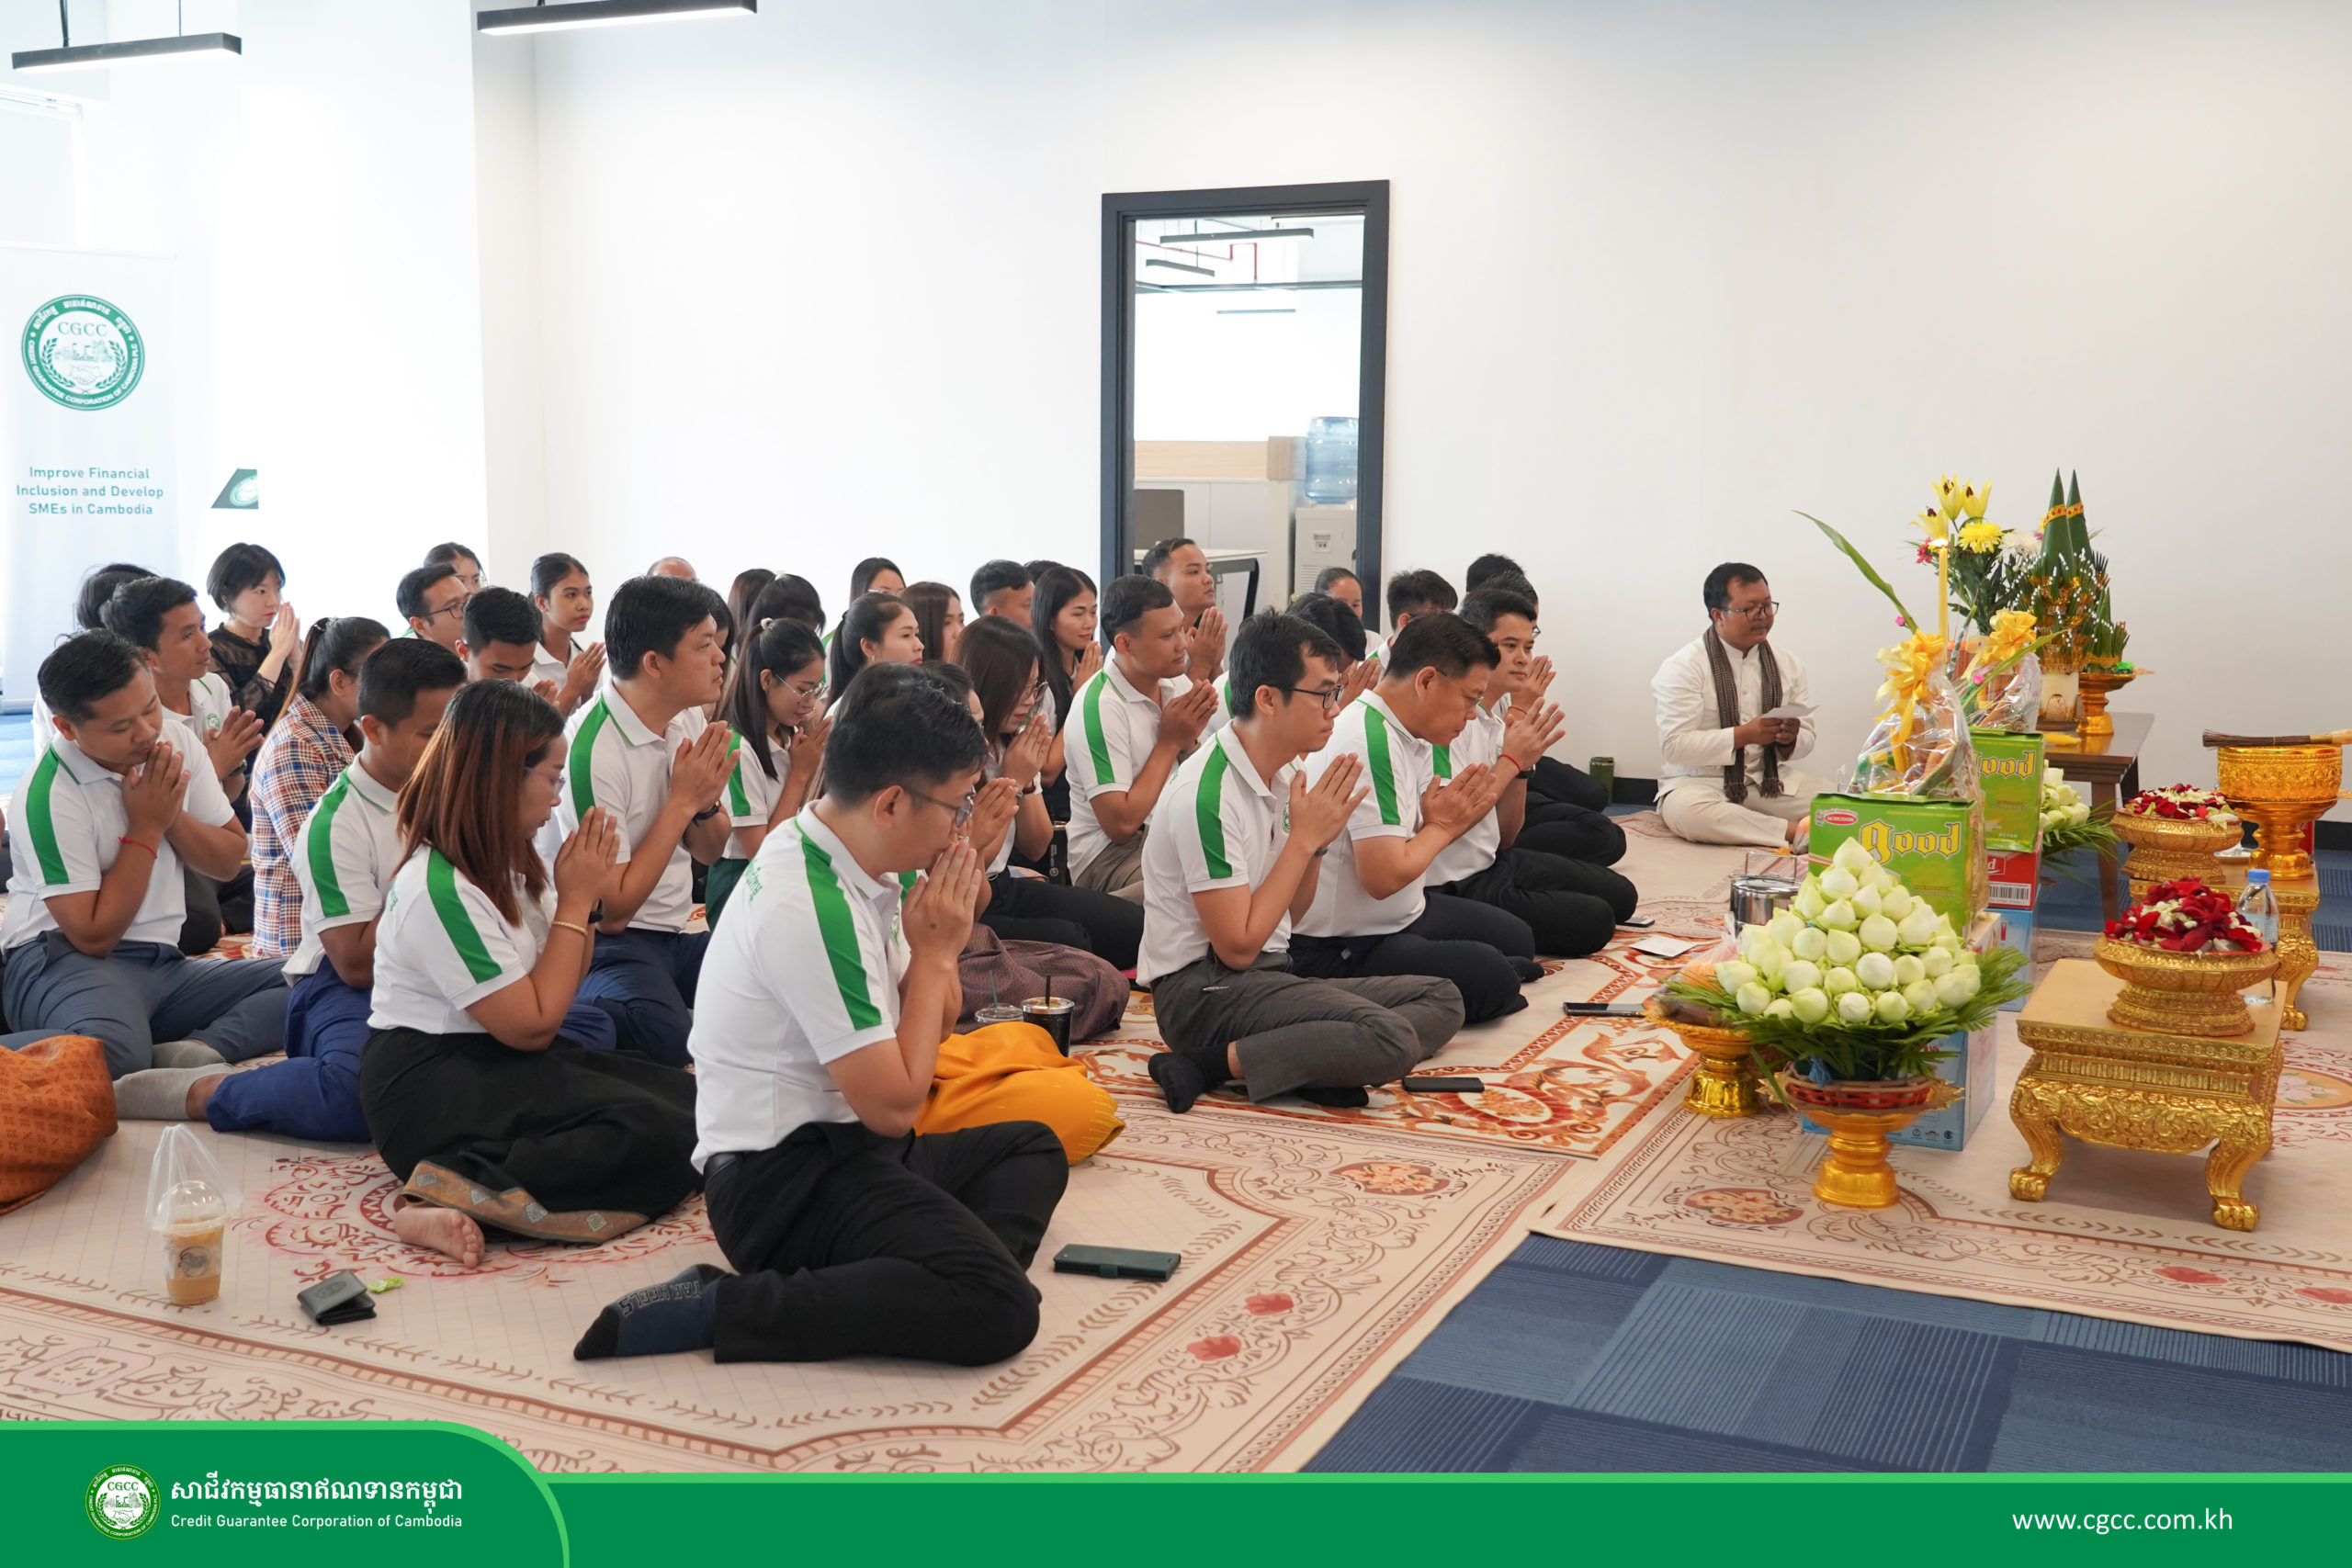 Blessing Ceremony to Welcome the Upcoming Pchum Ben Festival